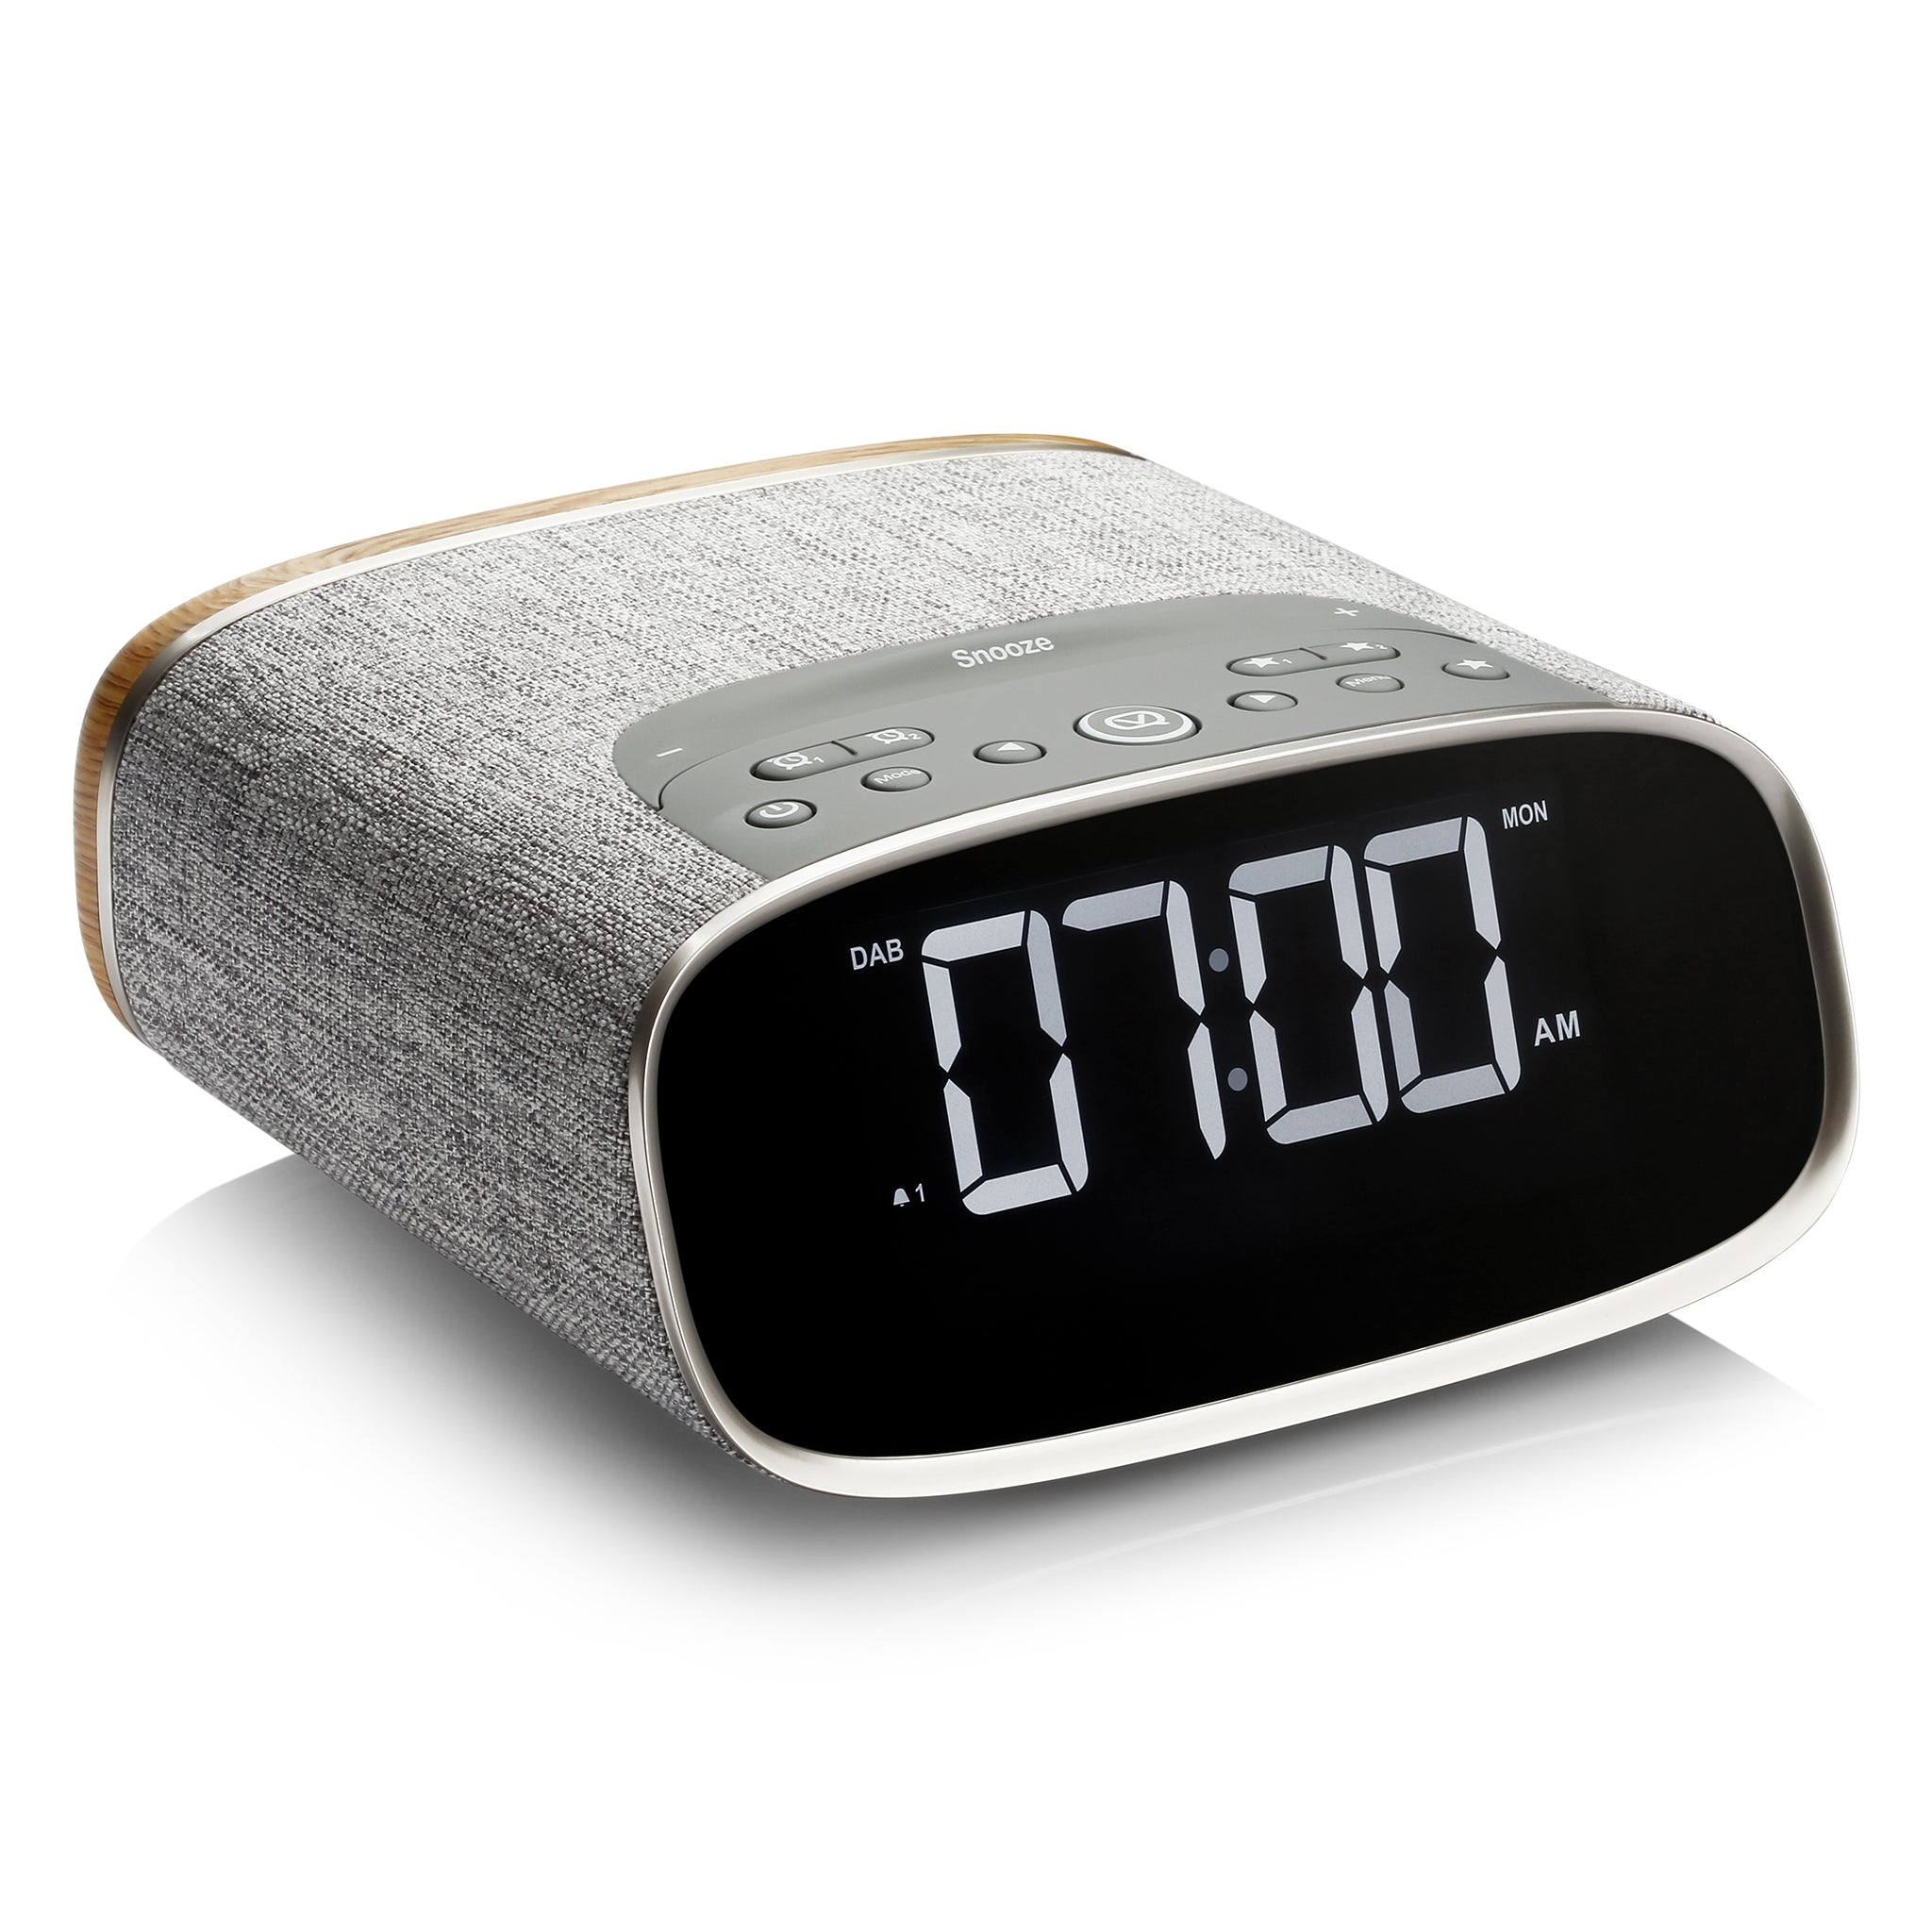 The MYVQ Lark is simply a beautiful bedside alarm clock radio. Making mornings a little more enjoyable with DAB / DAB+ Digital & FM Radio and also Bluetooth speaker.